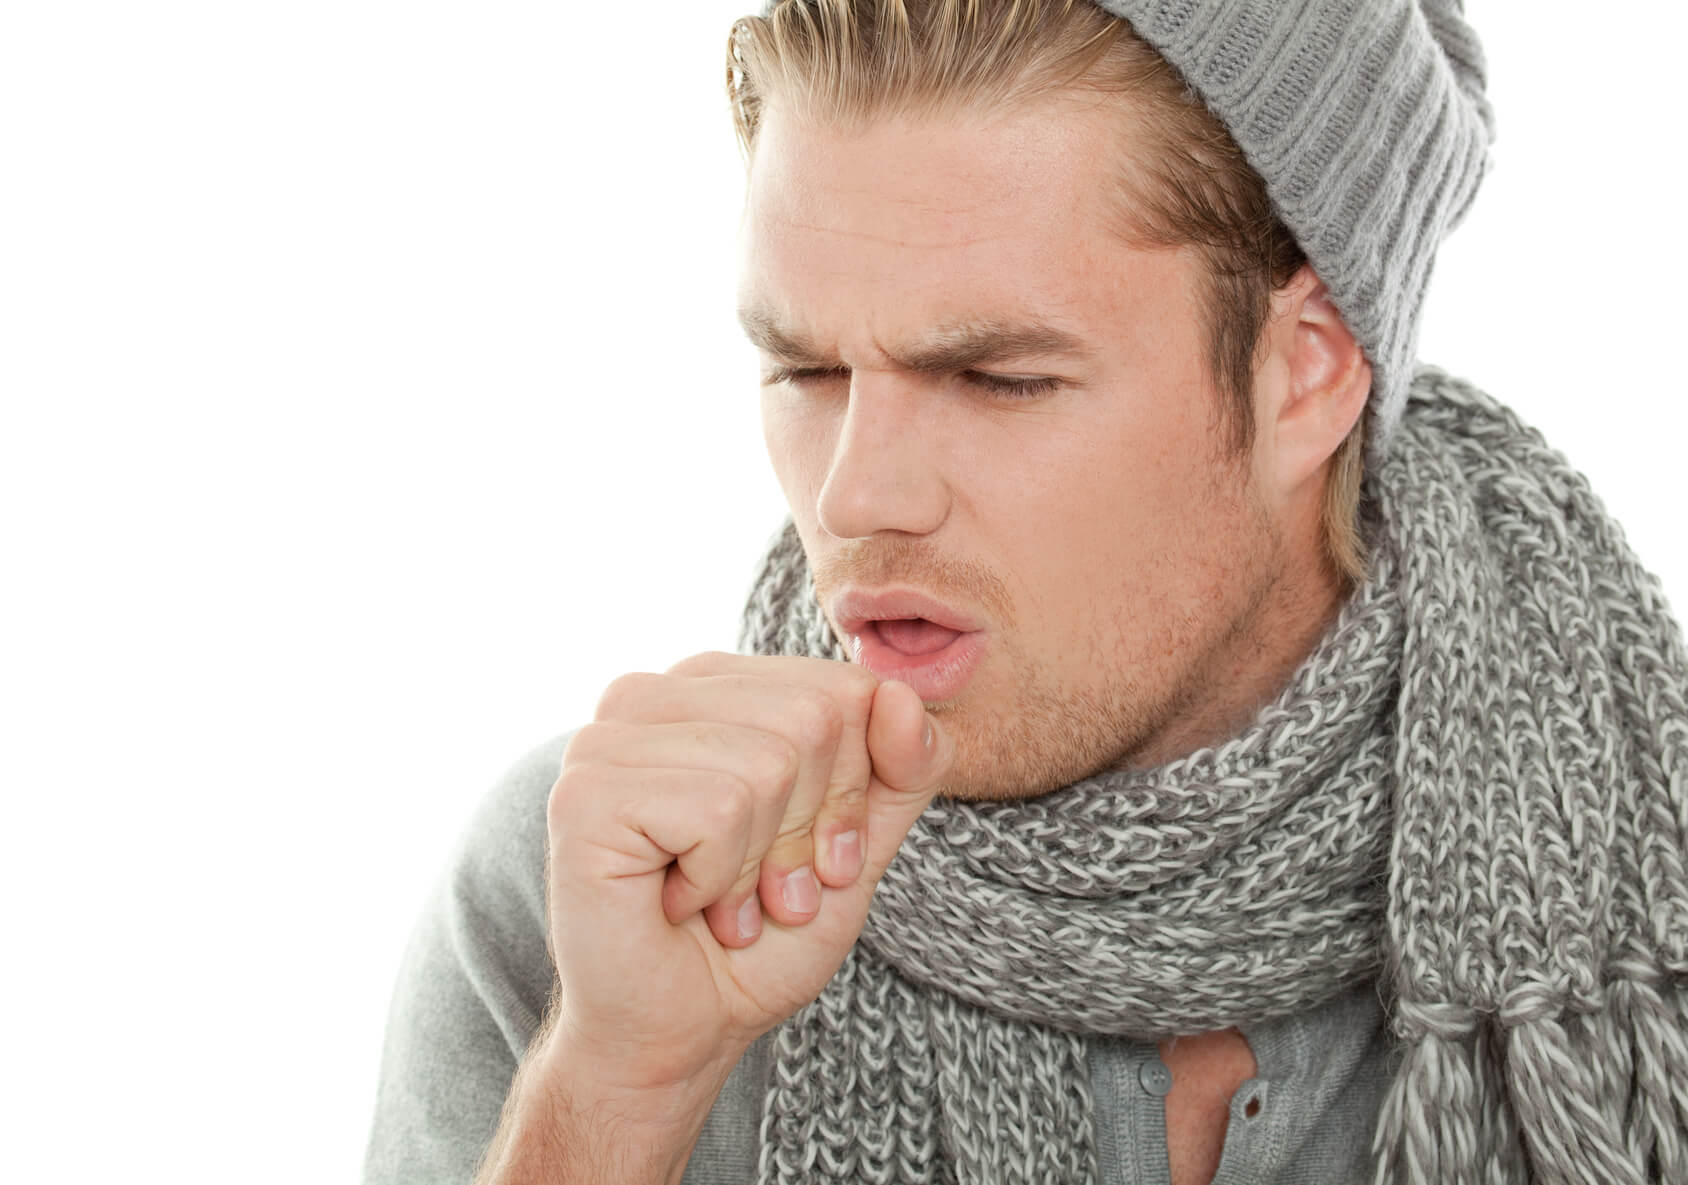 Coughing Image Photo Picture Wallpaper Free Download